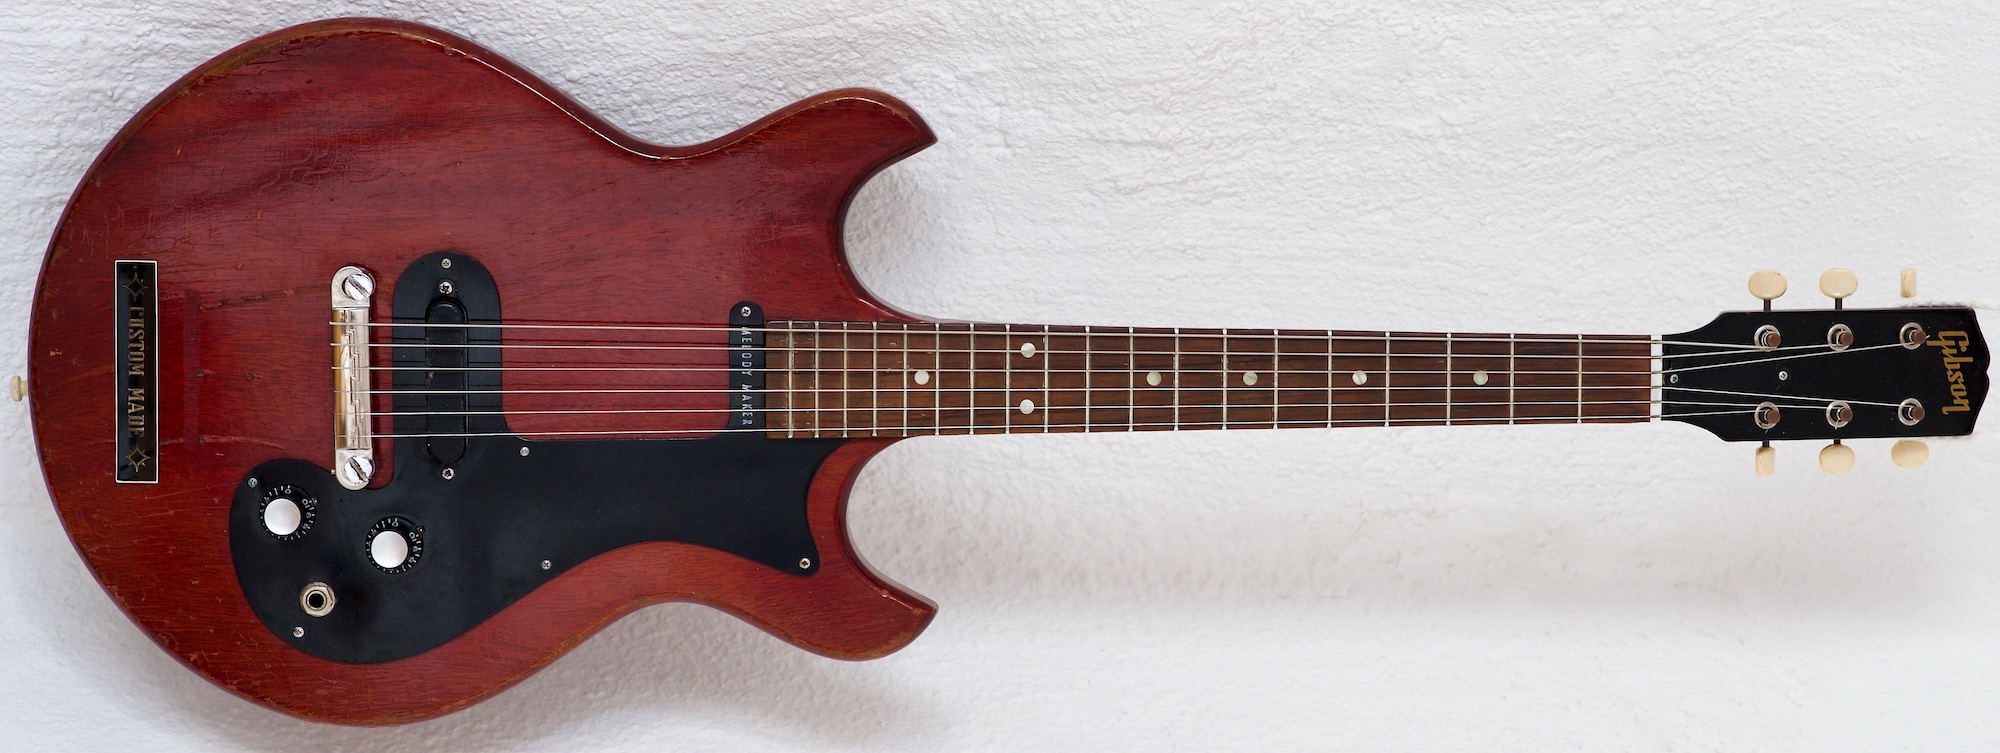 A Gibson Melody Maker 3/4 from 1965